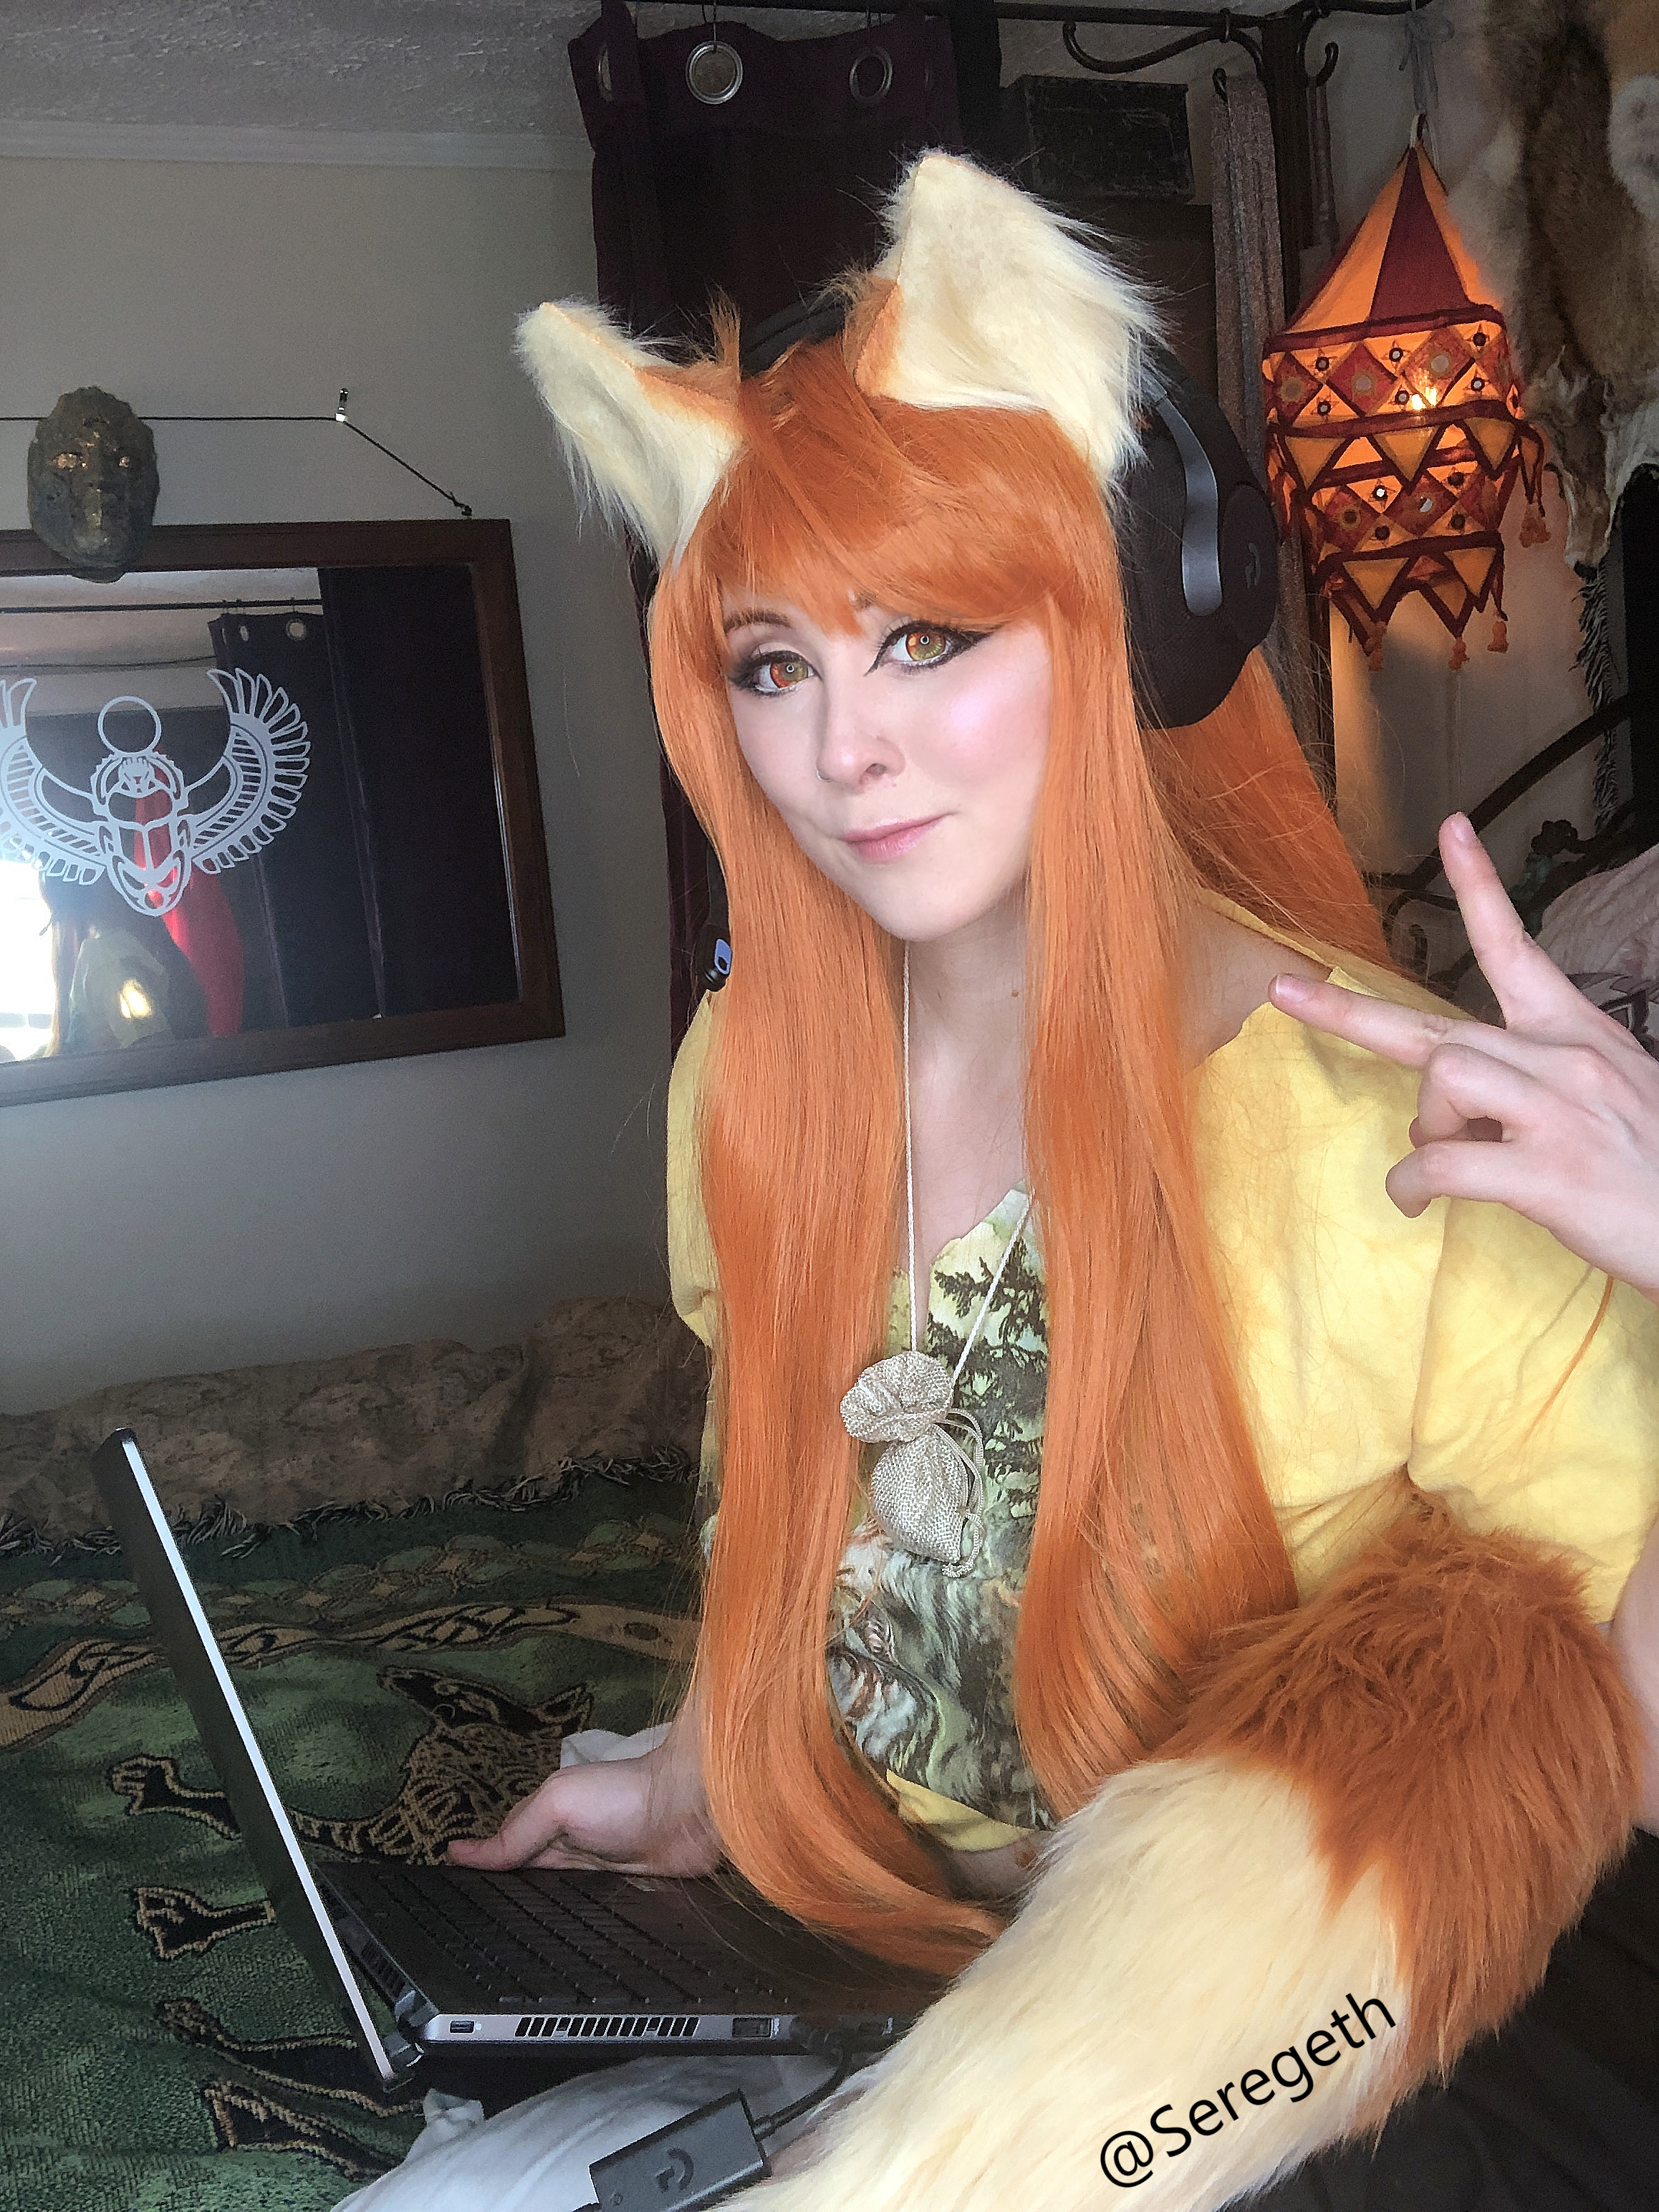 For April 1, Cosplayers Around The World Had A Convention…In Their Pajamas